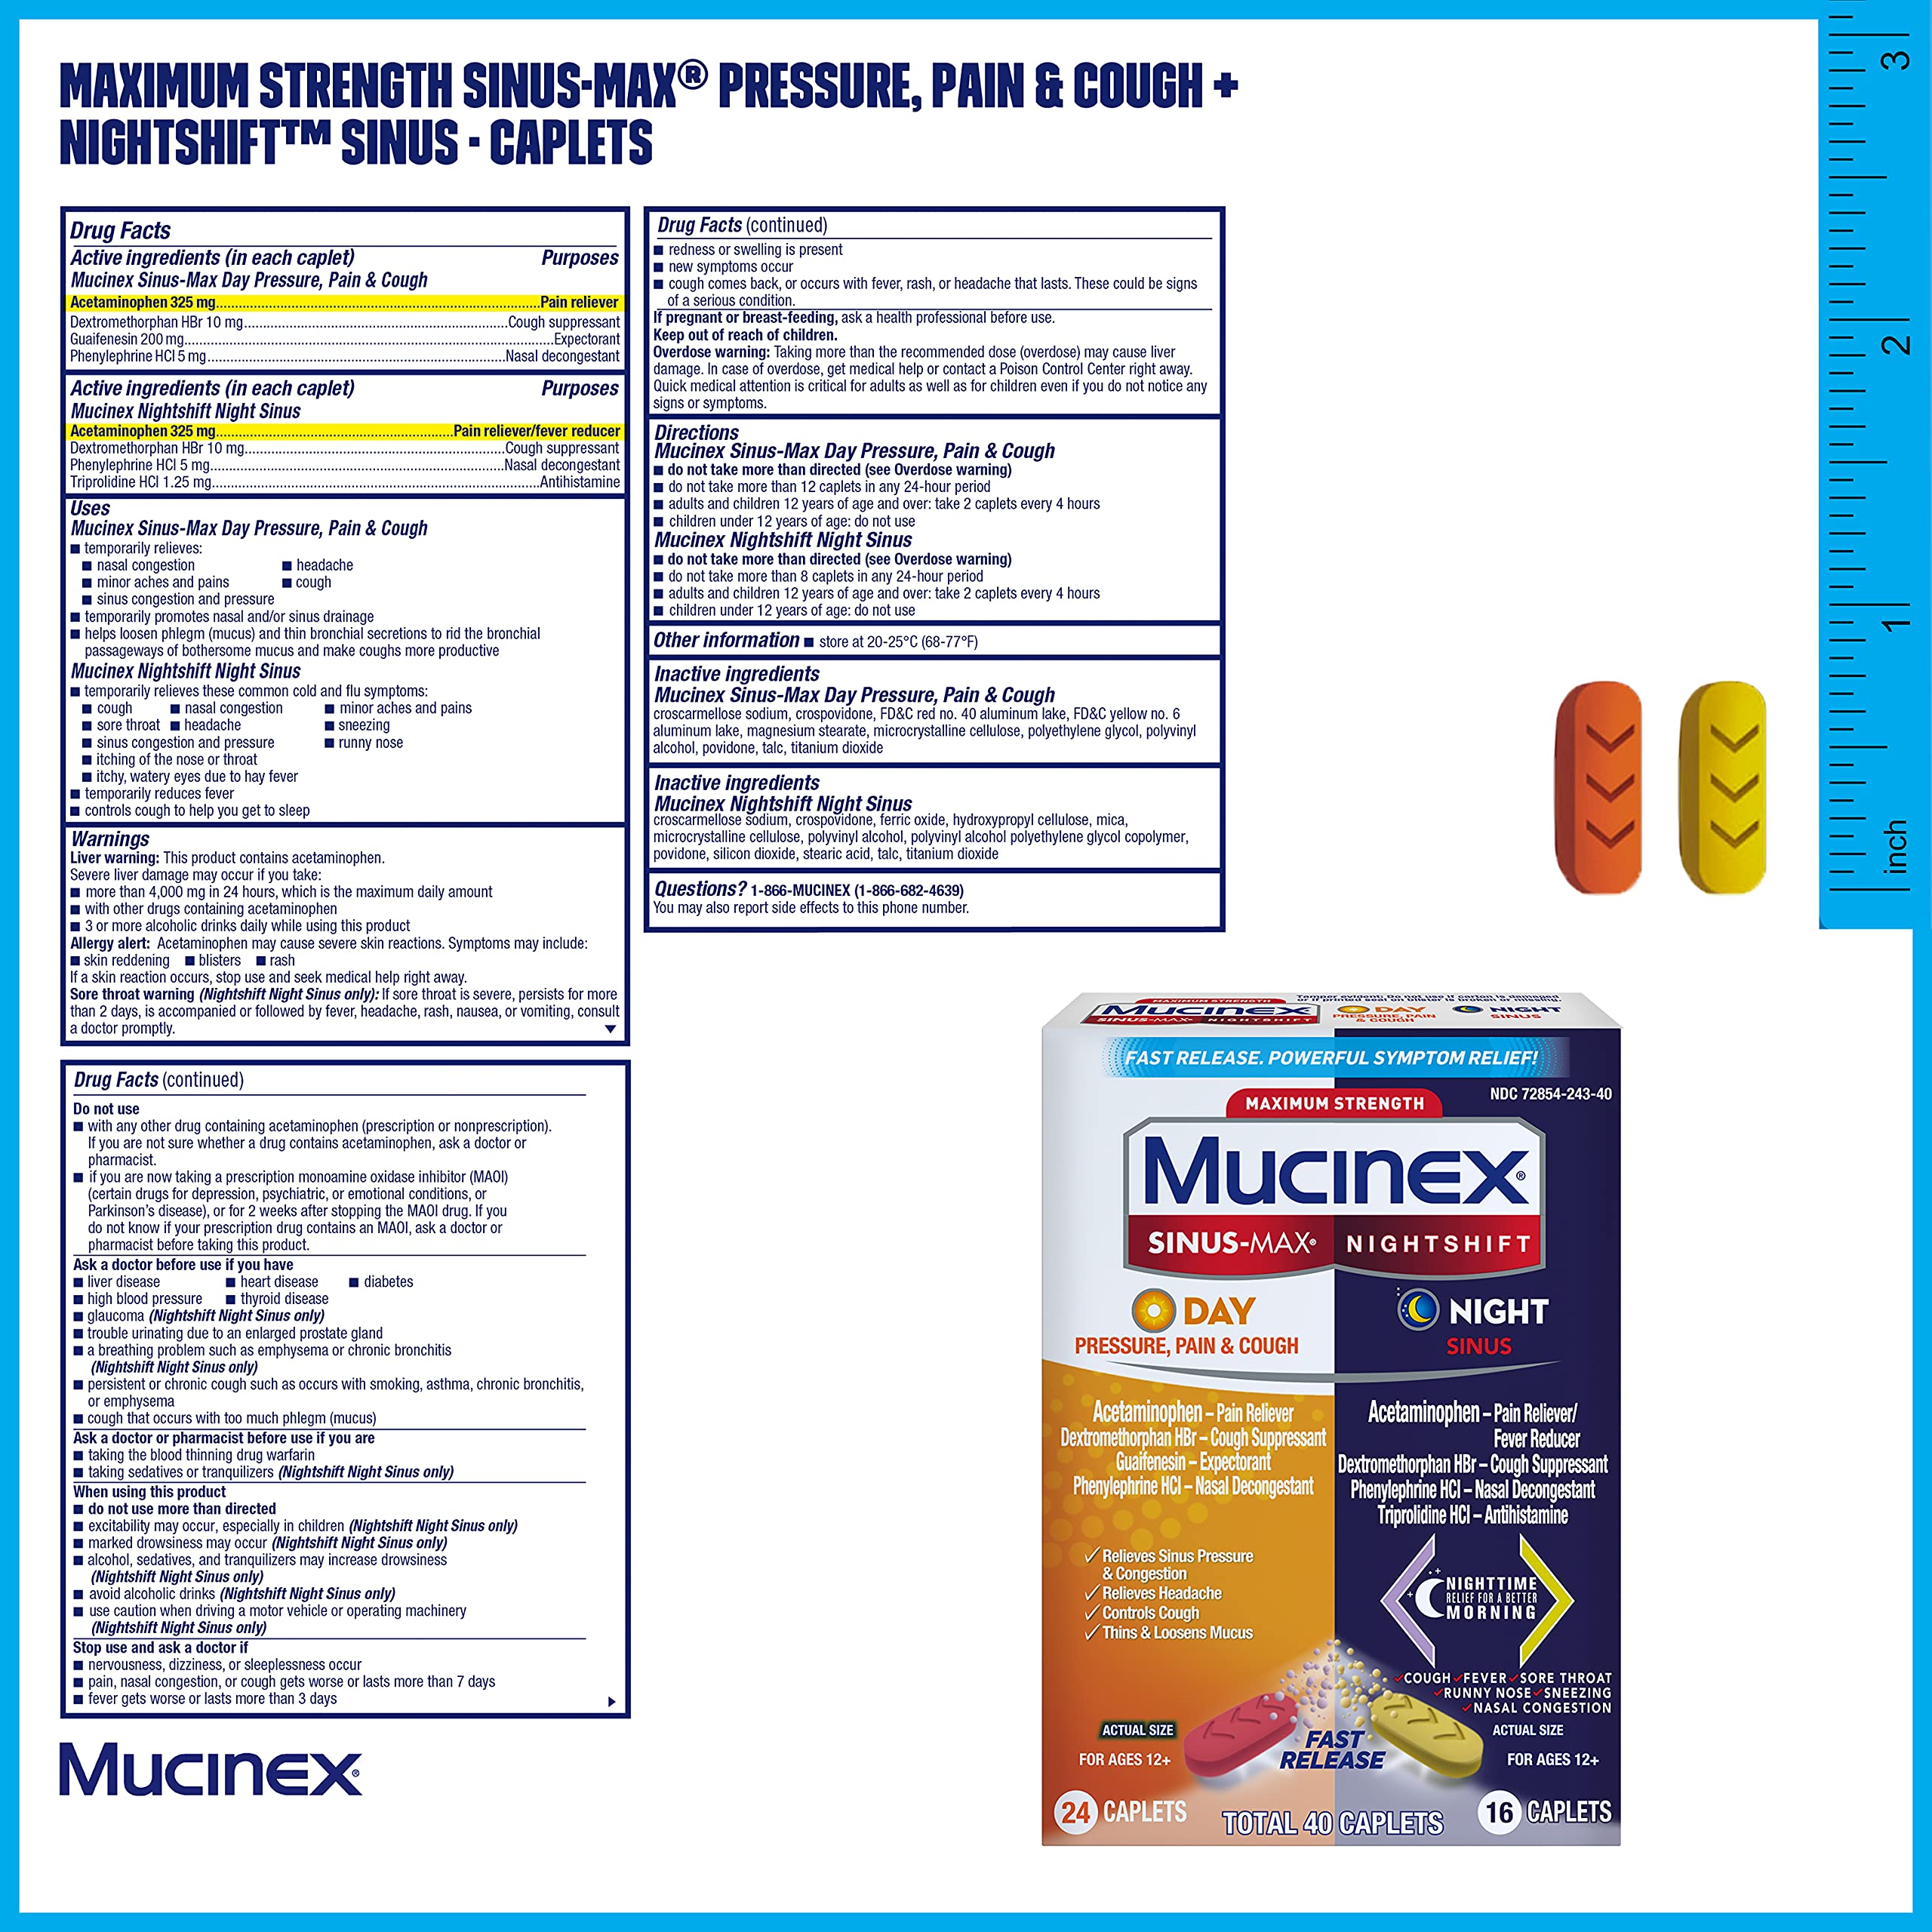 Mucinex Maximum Strength Sinus-Max (Day) Pressure, Pain & Cough & Nightshift (Night) Sinus Caplets, Fast Release, Powerful Multi-Symptom Relief, 40 caplets (24 Day time + 16 Night time) (Pack of 2)